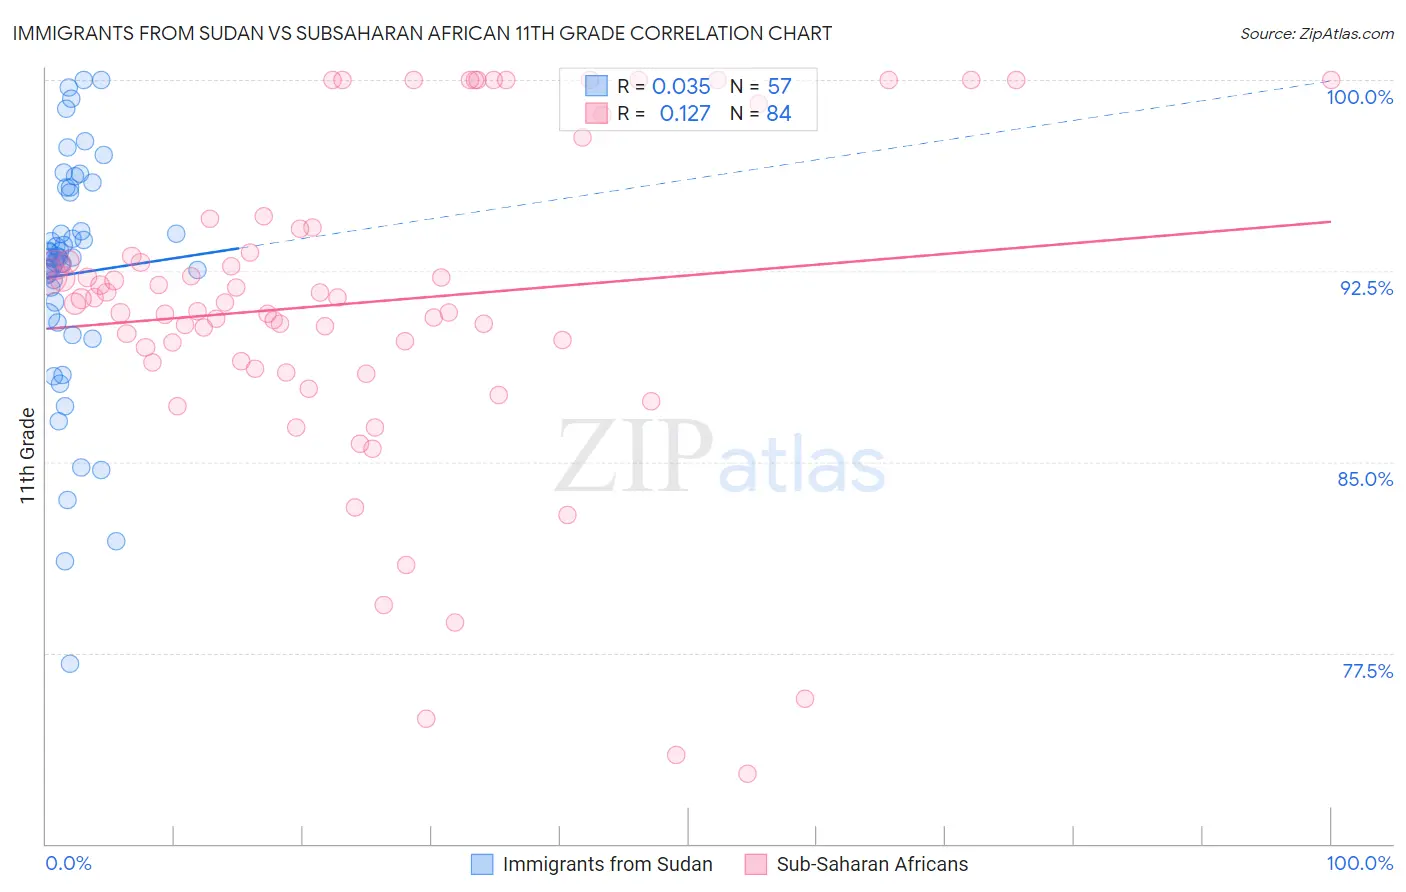 Immigrants from Sudan vs Subsaharan African 11th Grade